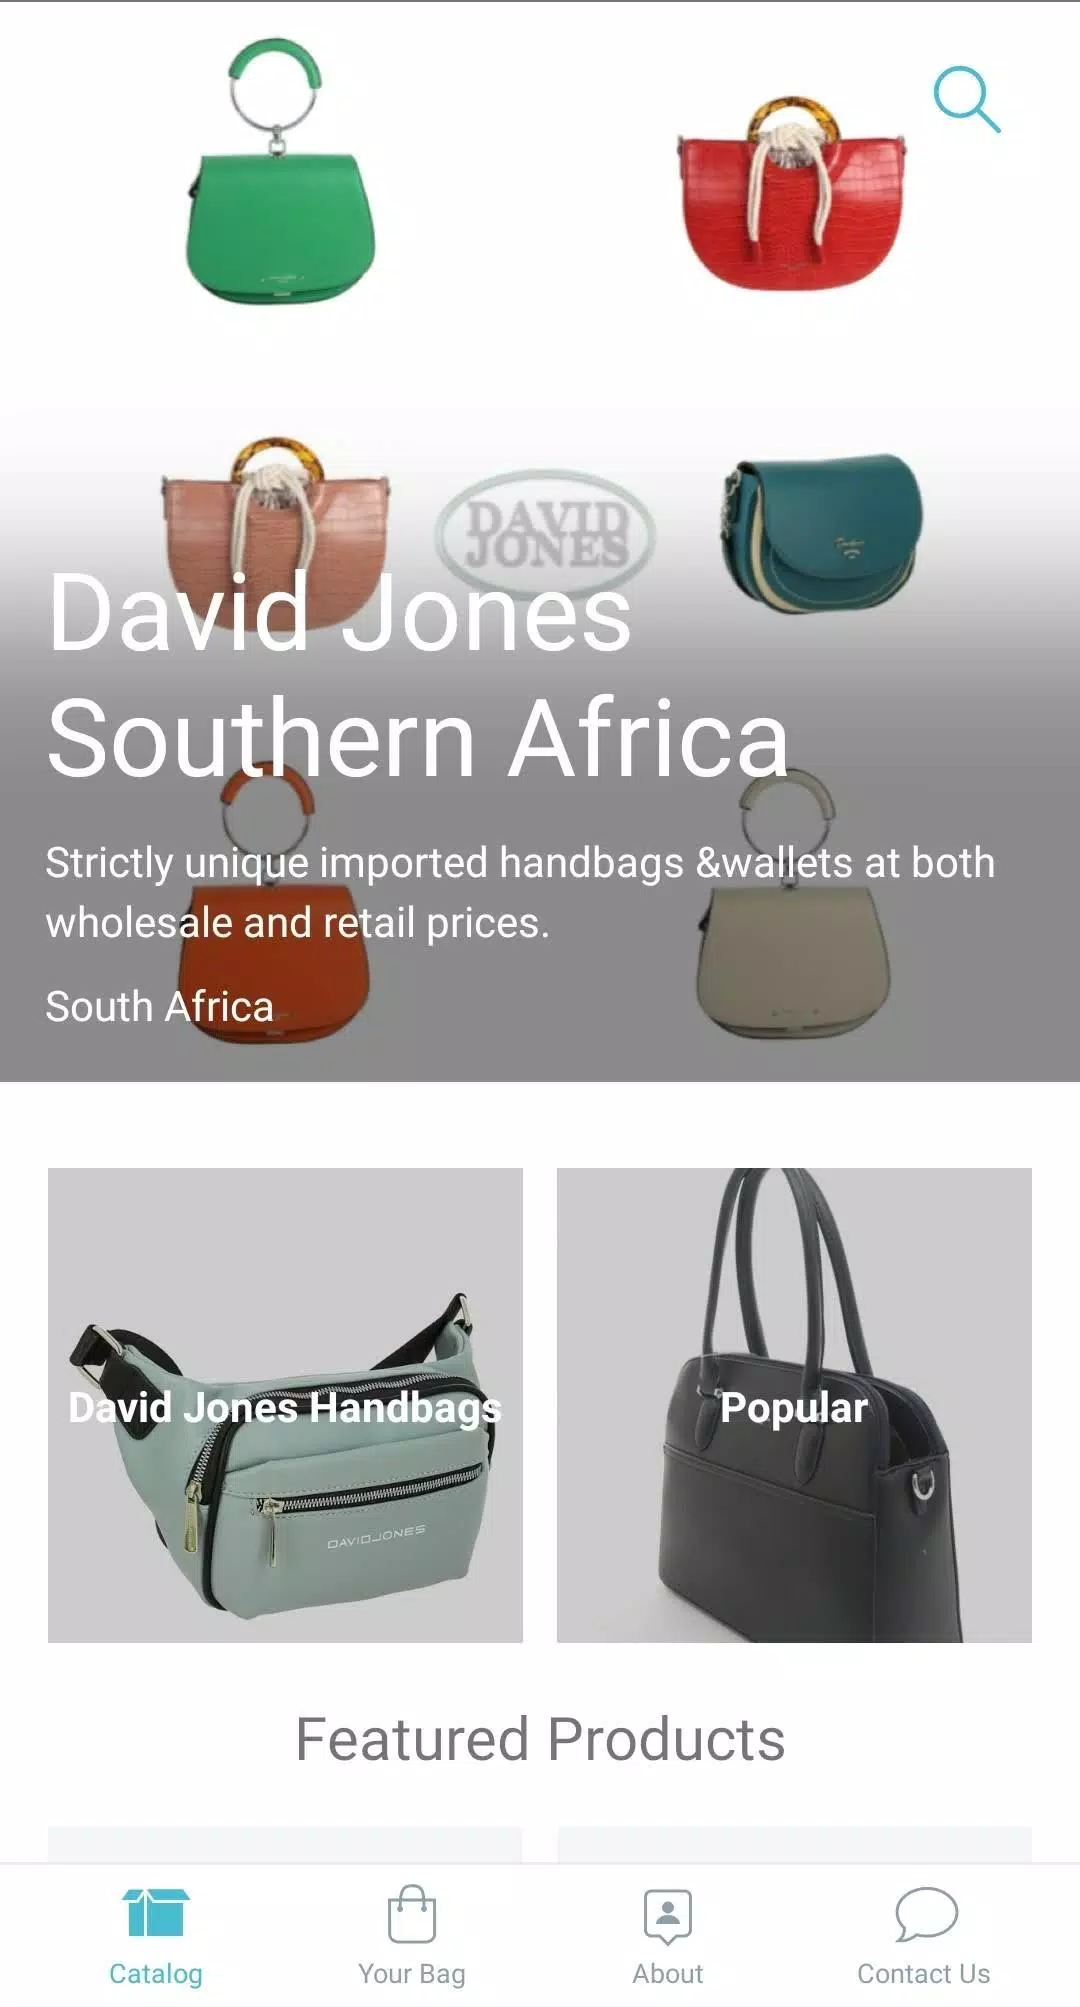 David Jones Southern Africa - The catalogue has been updated Bags that make  you speak French without even saying a word Contact Us for both  wholesale and retail prices! WhatsApp 0848538463 Land